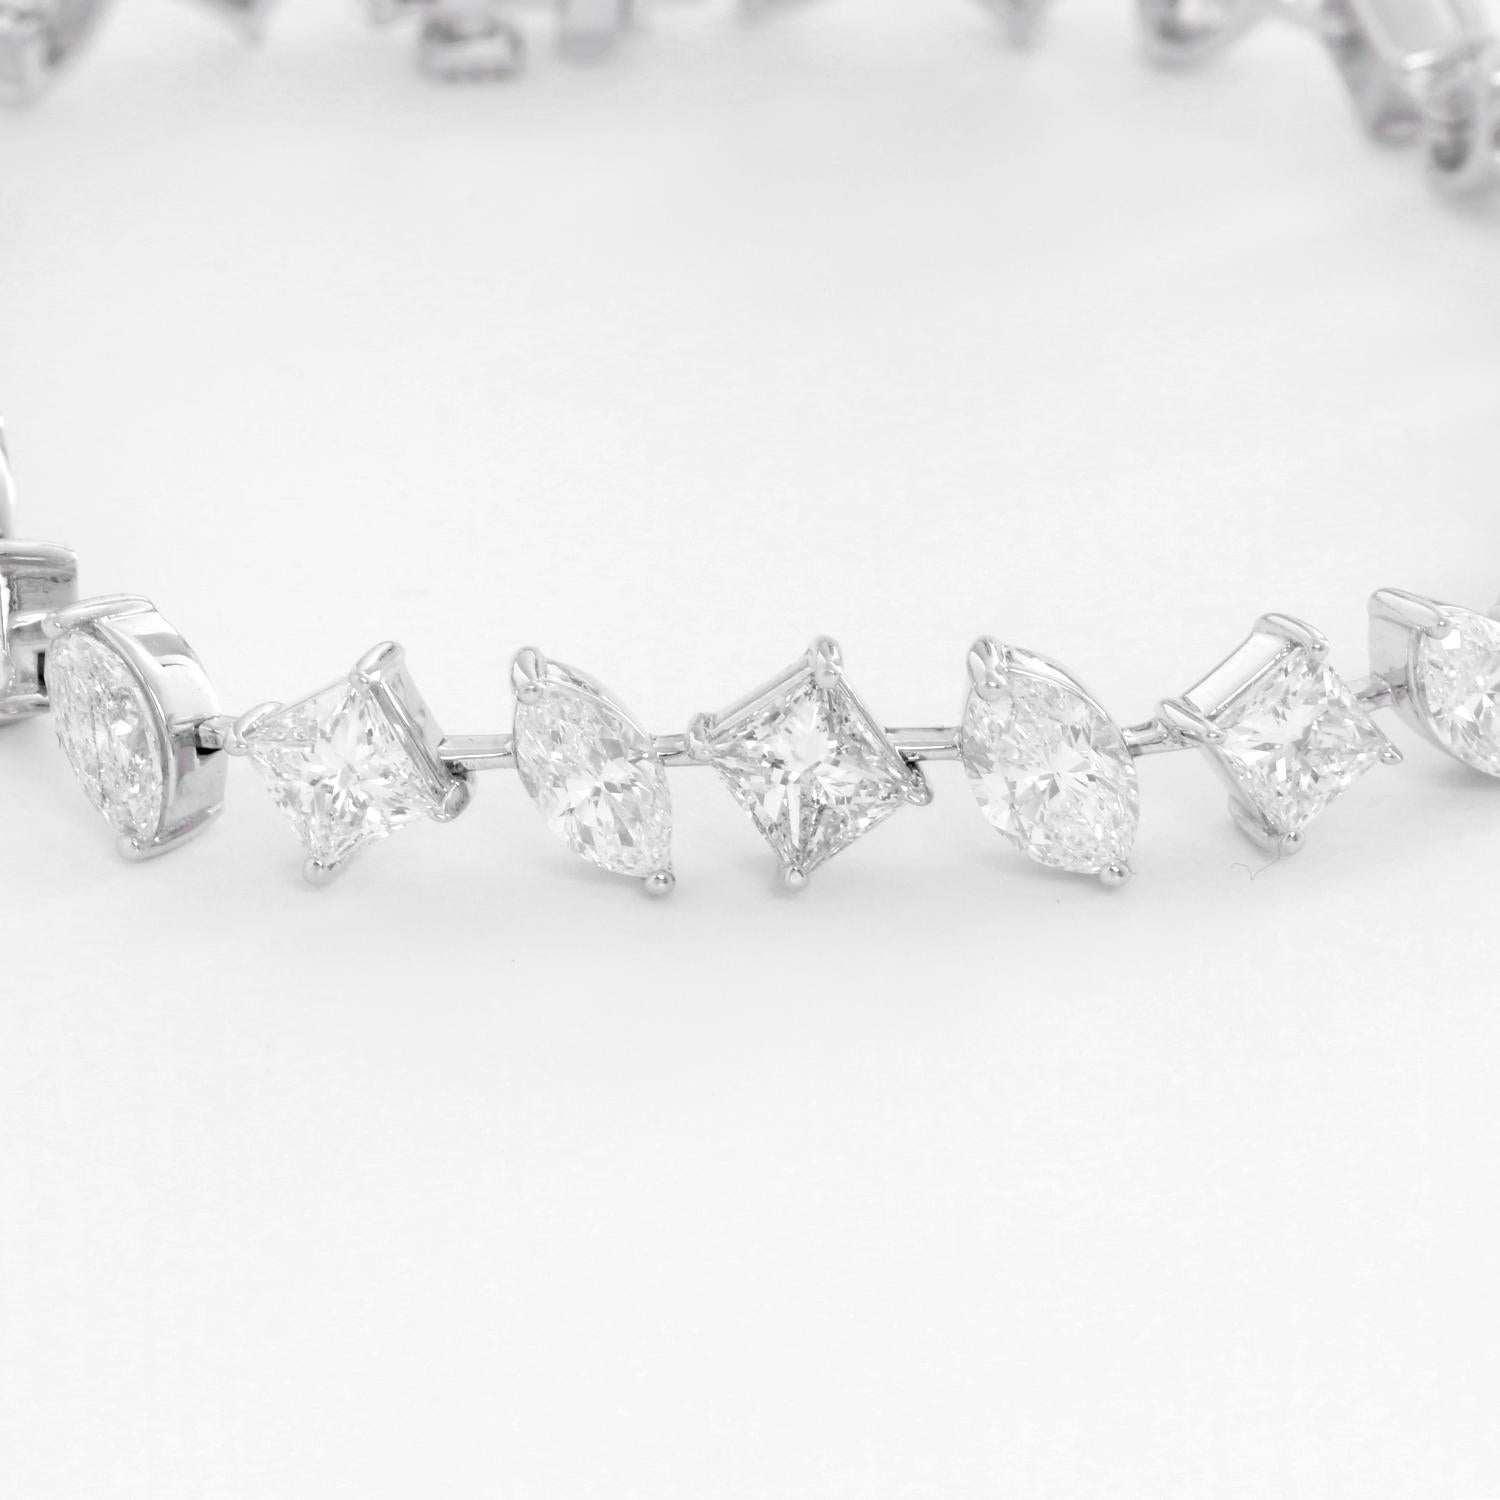 Stunning 18K White gold Tennis Bracelet 13.39 cts. - Crafted in 18K White gold with  28 diamonds weighing 13.39cts.  Alternating from a Princess cut and a Pear shaped diamond. Color G-H - Clarity SI2-SI3. Truly stunning and one of a kind.  7 inches